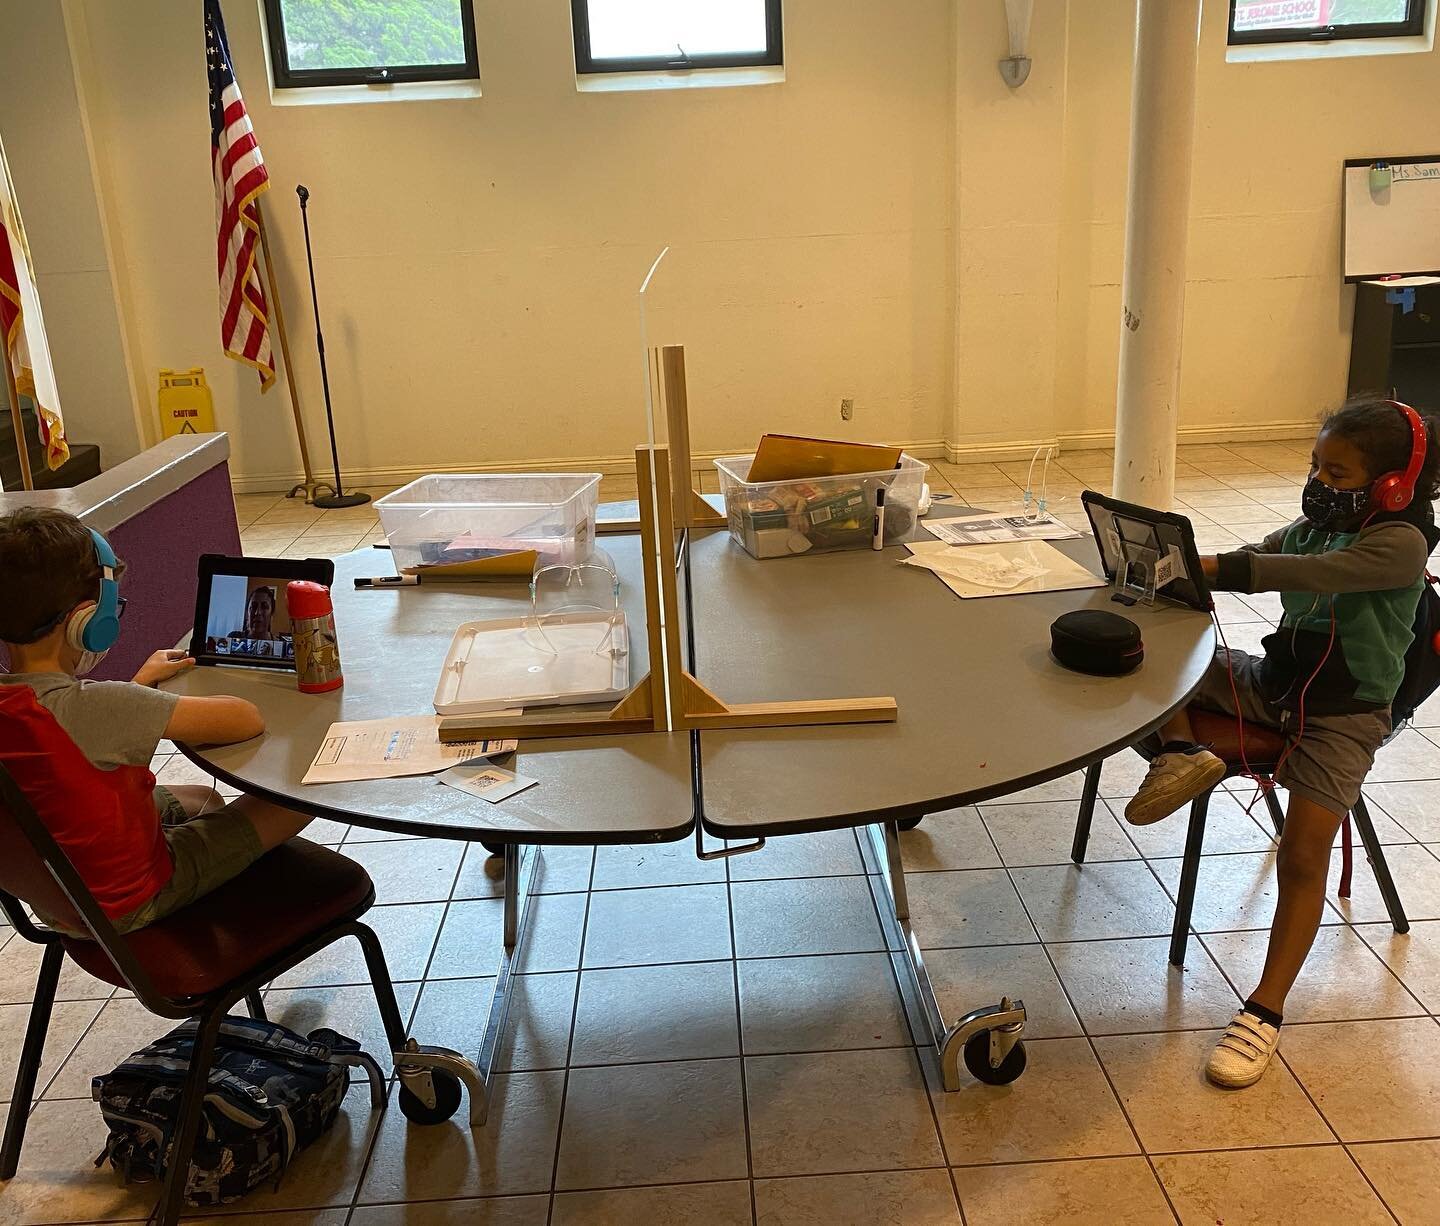 Our small learning cohorts are off to a great start! We are socially distancing with partitions on every table. Our kids have all the resources needed to have a productive school year. #distancelearning #smallgroupinstruction #tutorialservices #acade